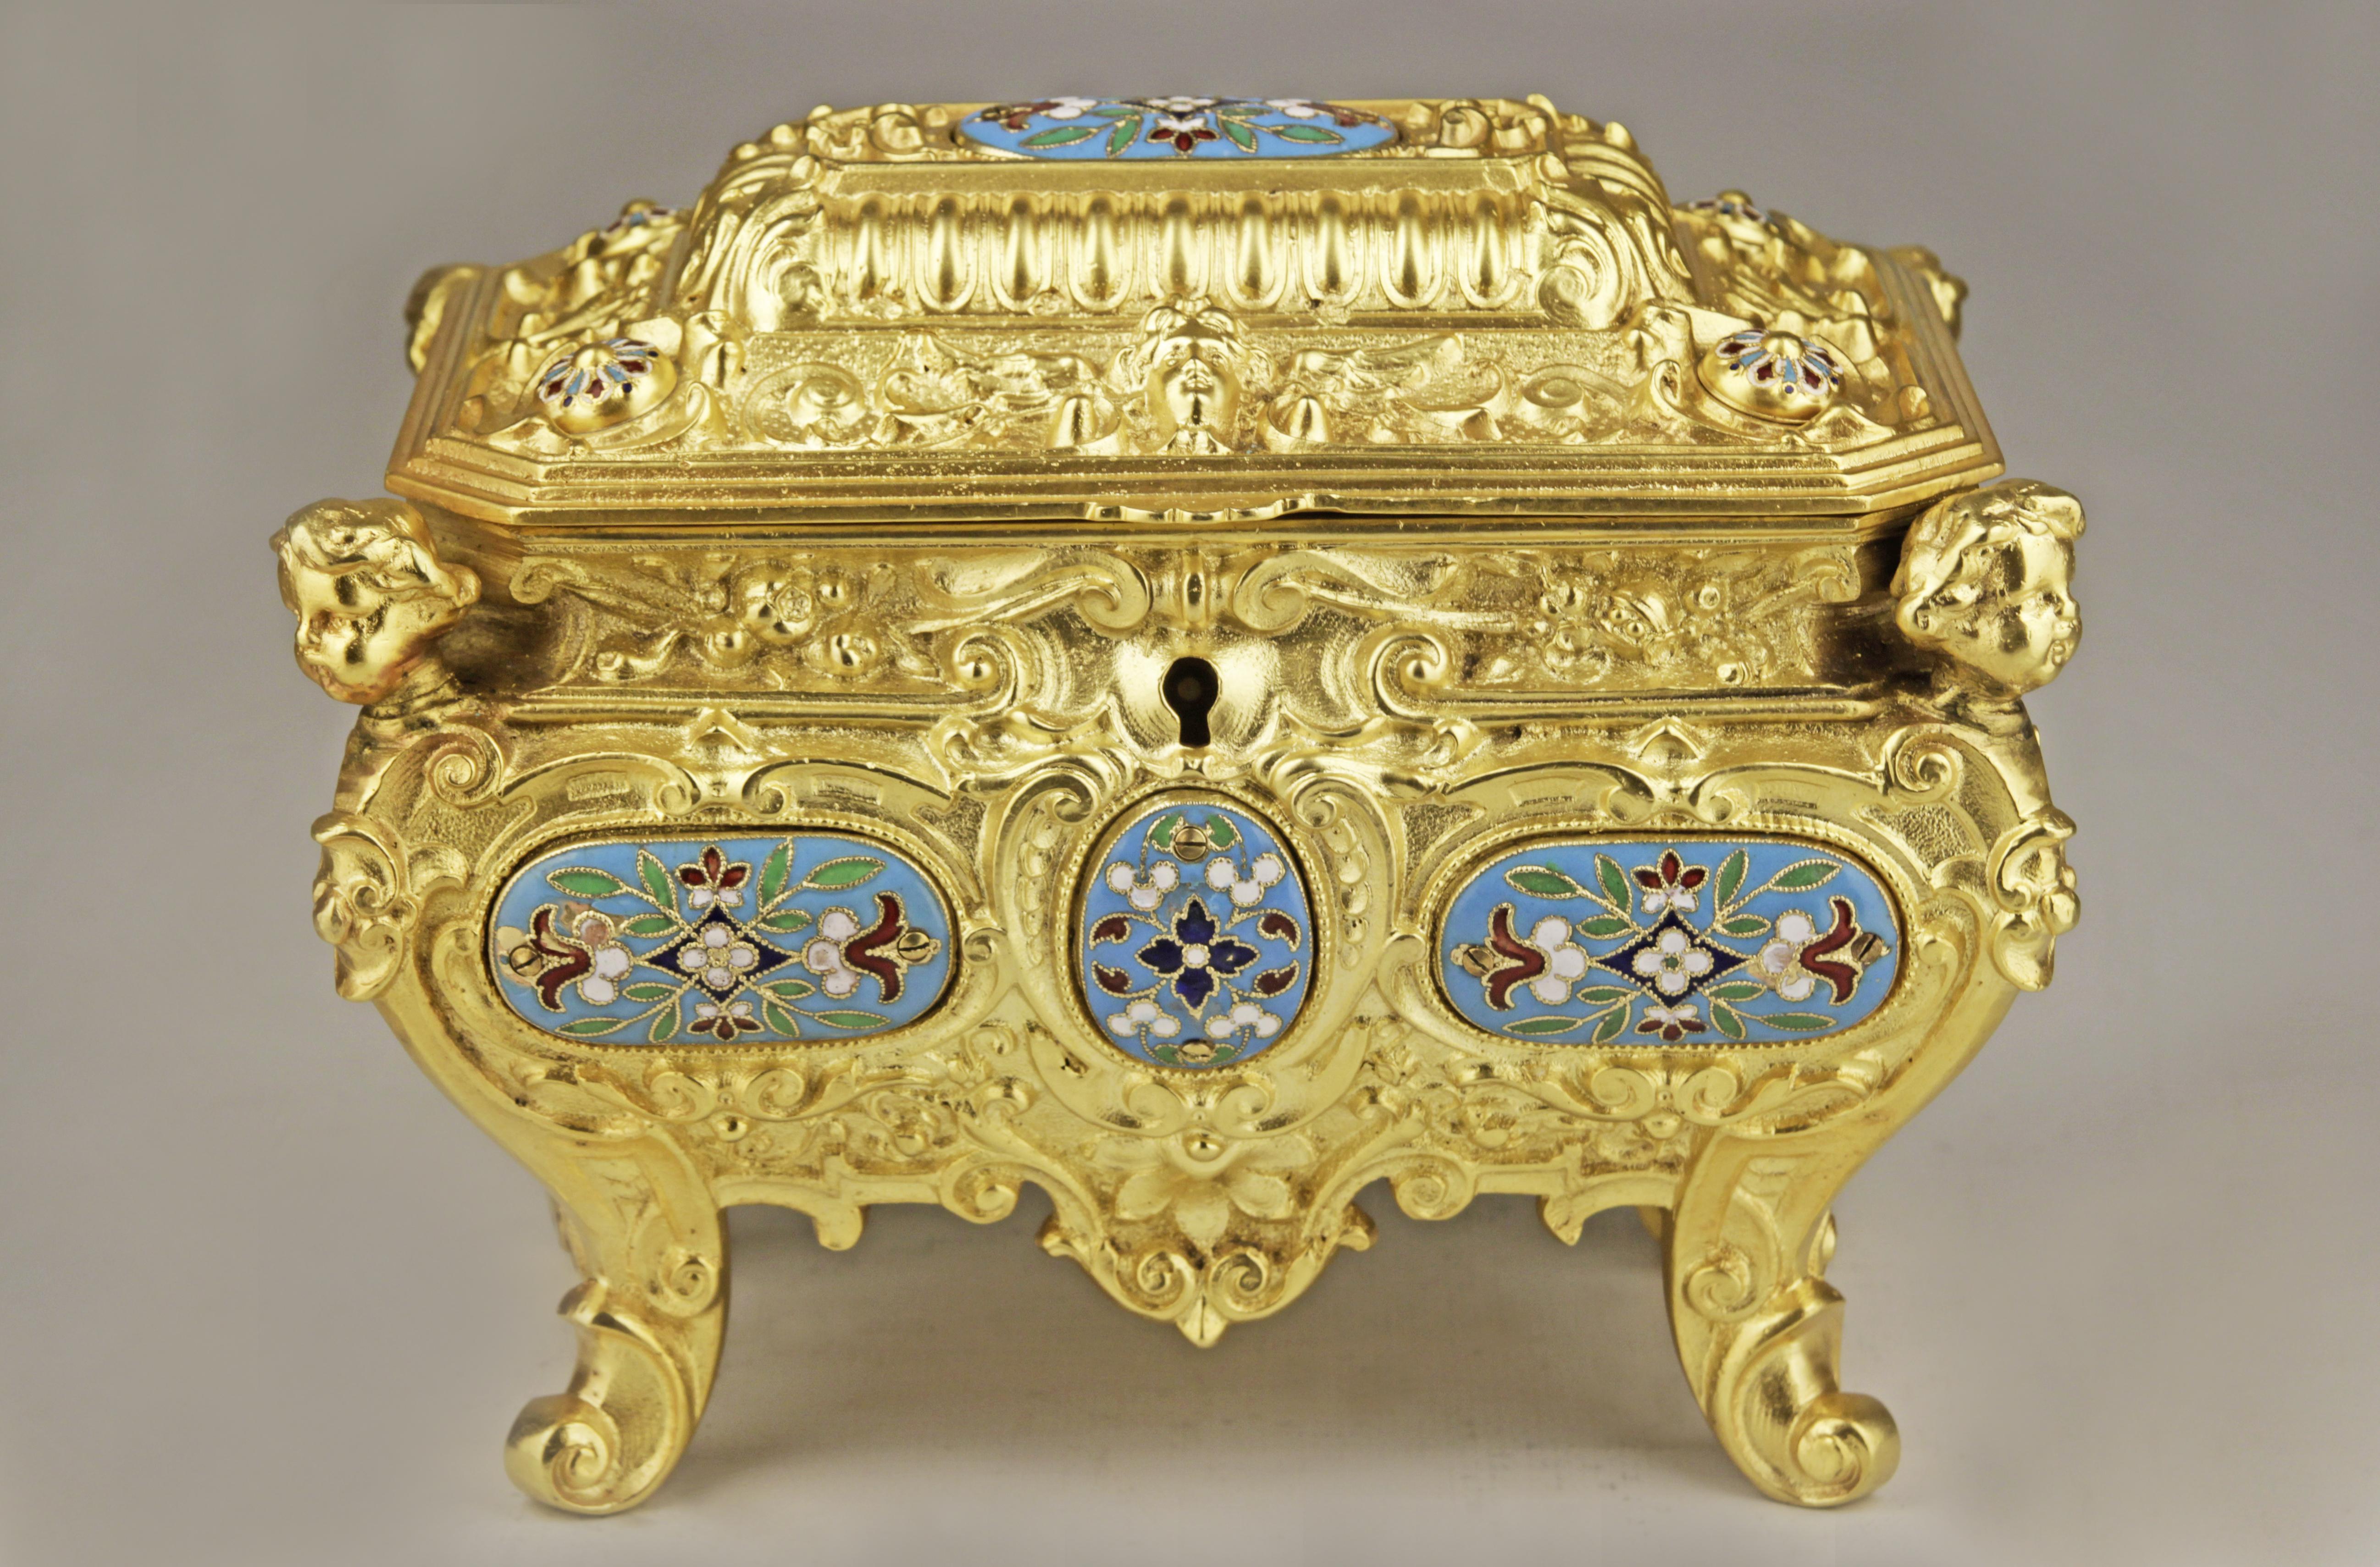 19th Century French Empire Cloisonné Bronze Jewelry Casket with Velvet Interior For Sale 2